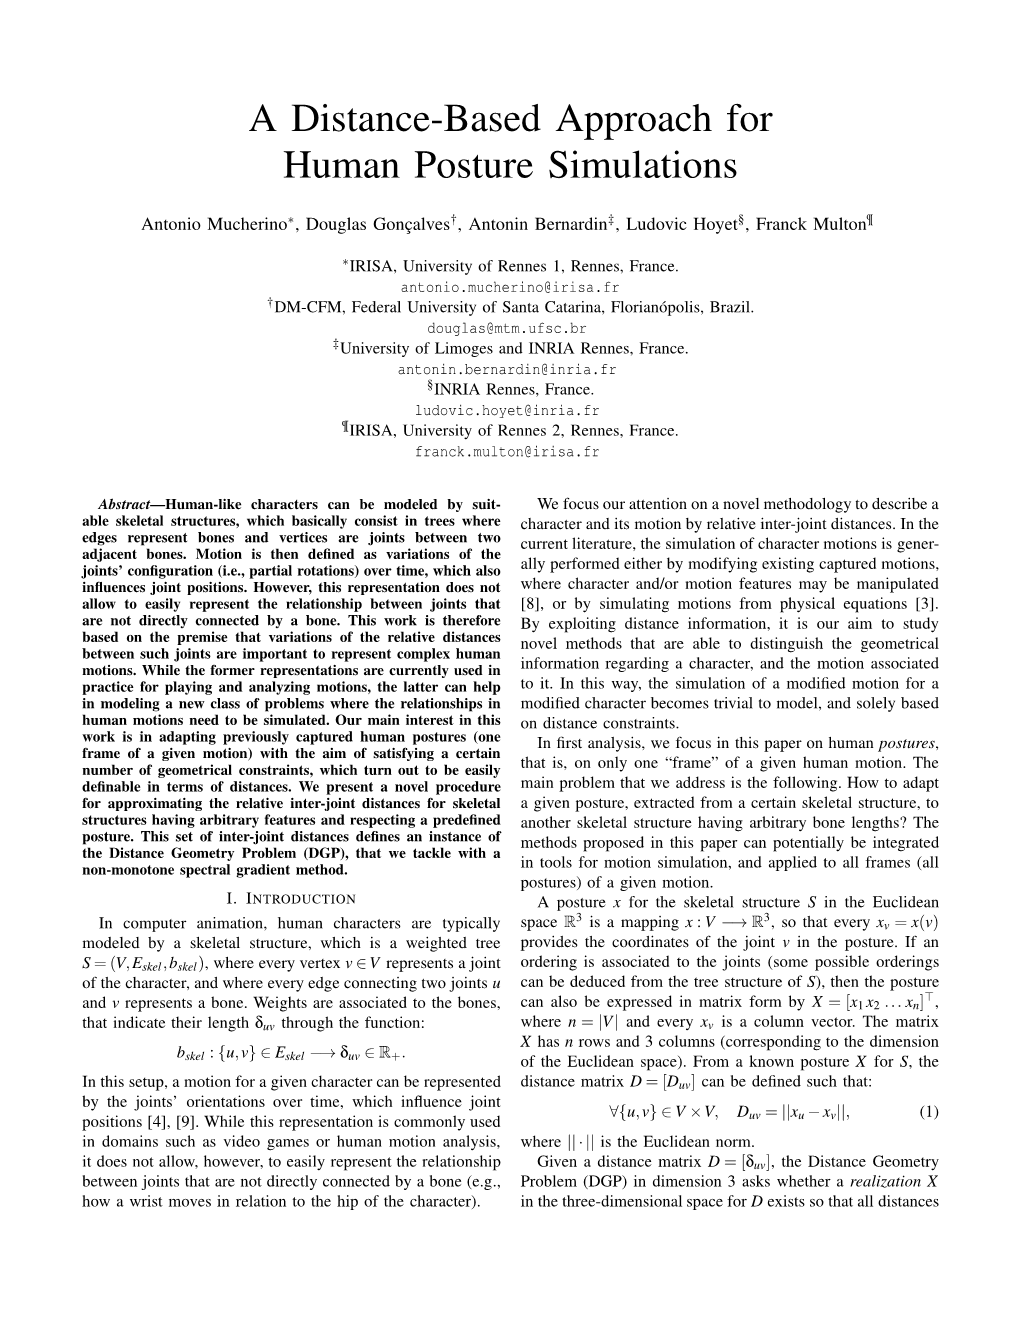 A Distance-Based Approach for Human Posture Simulations